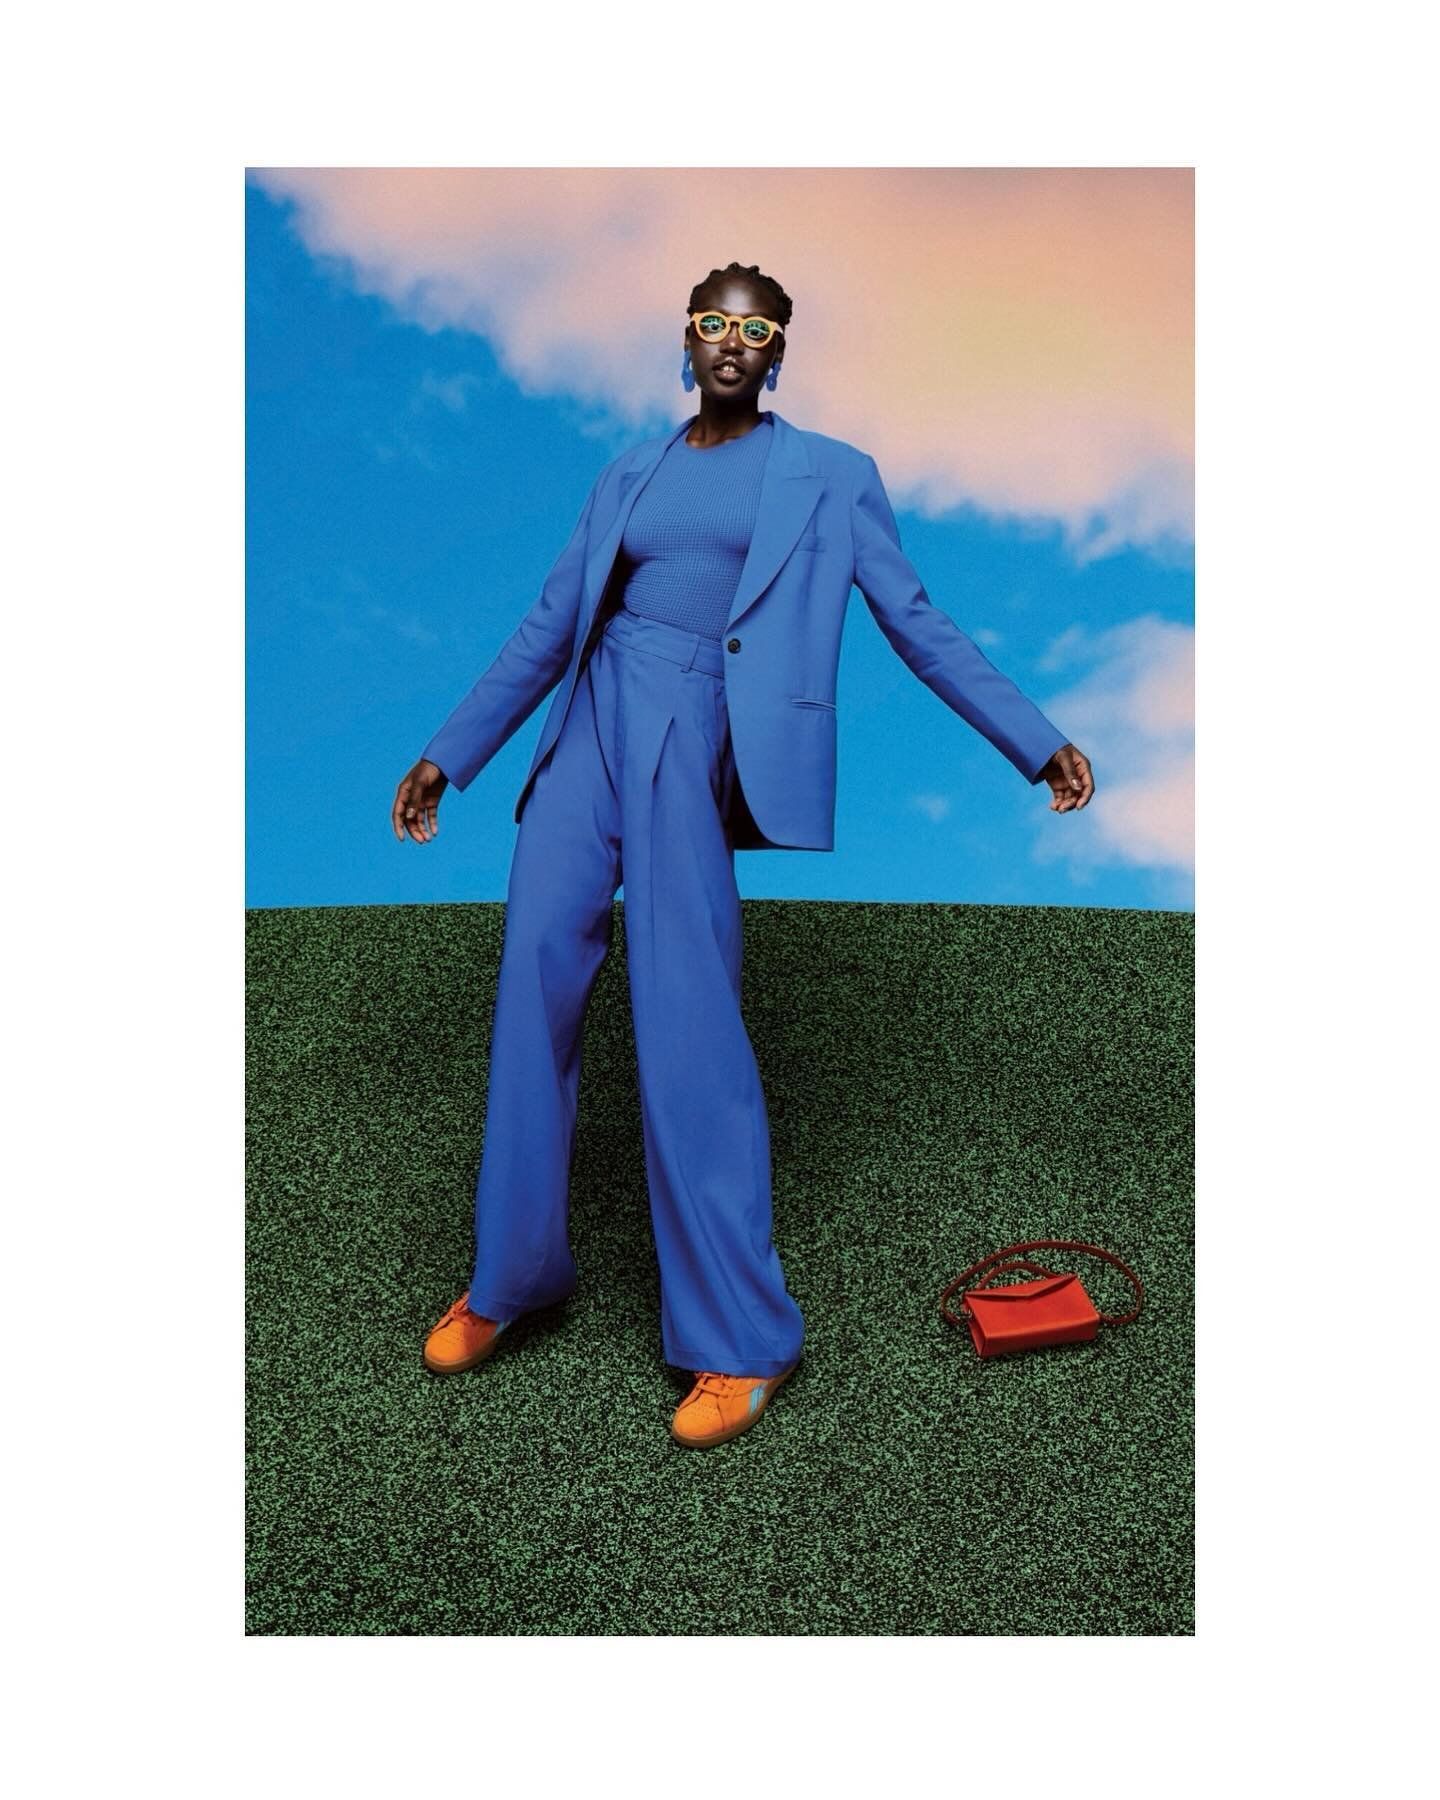 Did you catch our @jacquesdurand Pacques frame in orange + @kuboraum Y3 in lavender eyewear in the latest style editorial in @avenuemagazine? It&rsquo;s a gorgeous visual story on colour created by @ourparkonline &amp; shot by @waltereneuman we love 